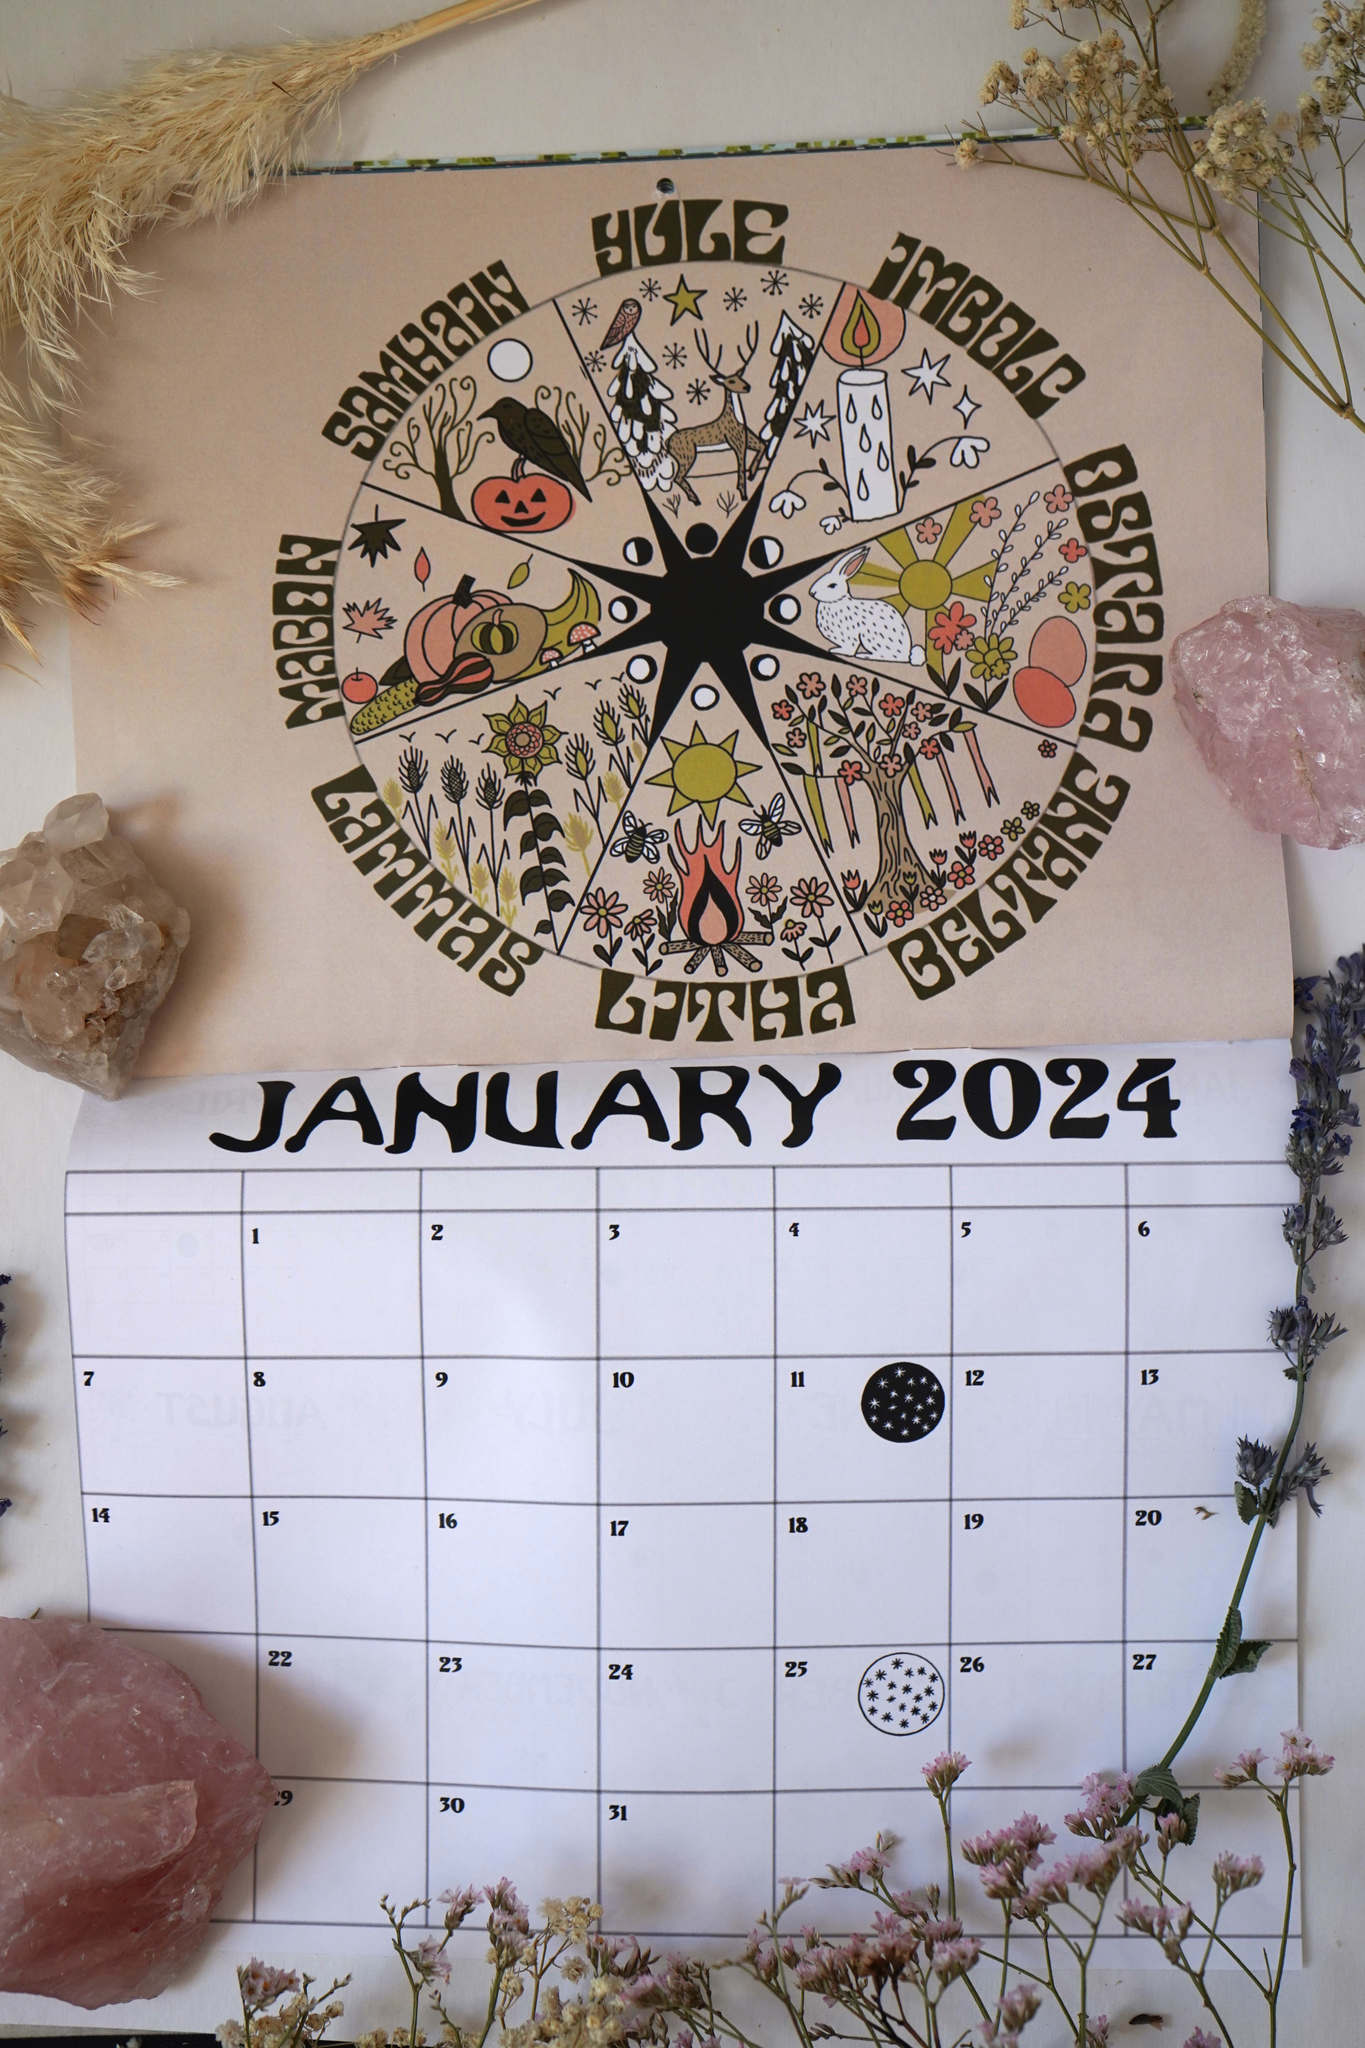 2023 Calendar Pre- order, designed and illustrated by Juliana Lachance, free shipping